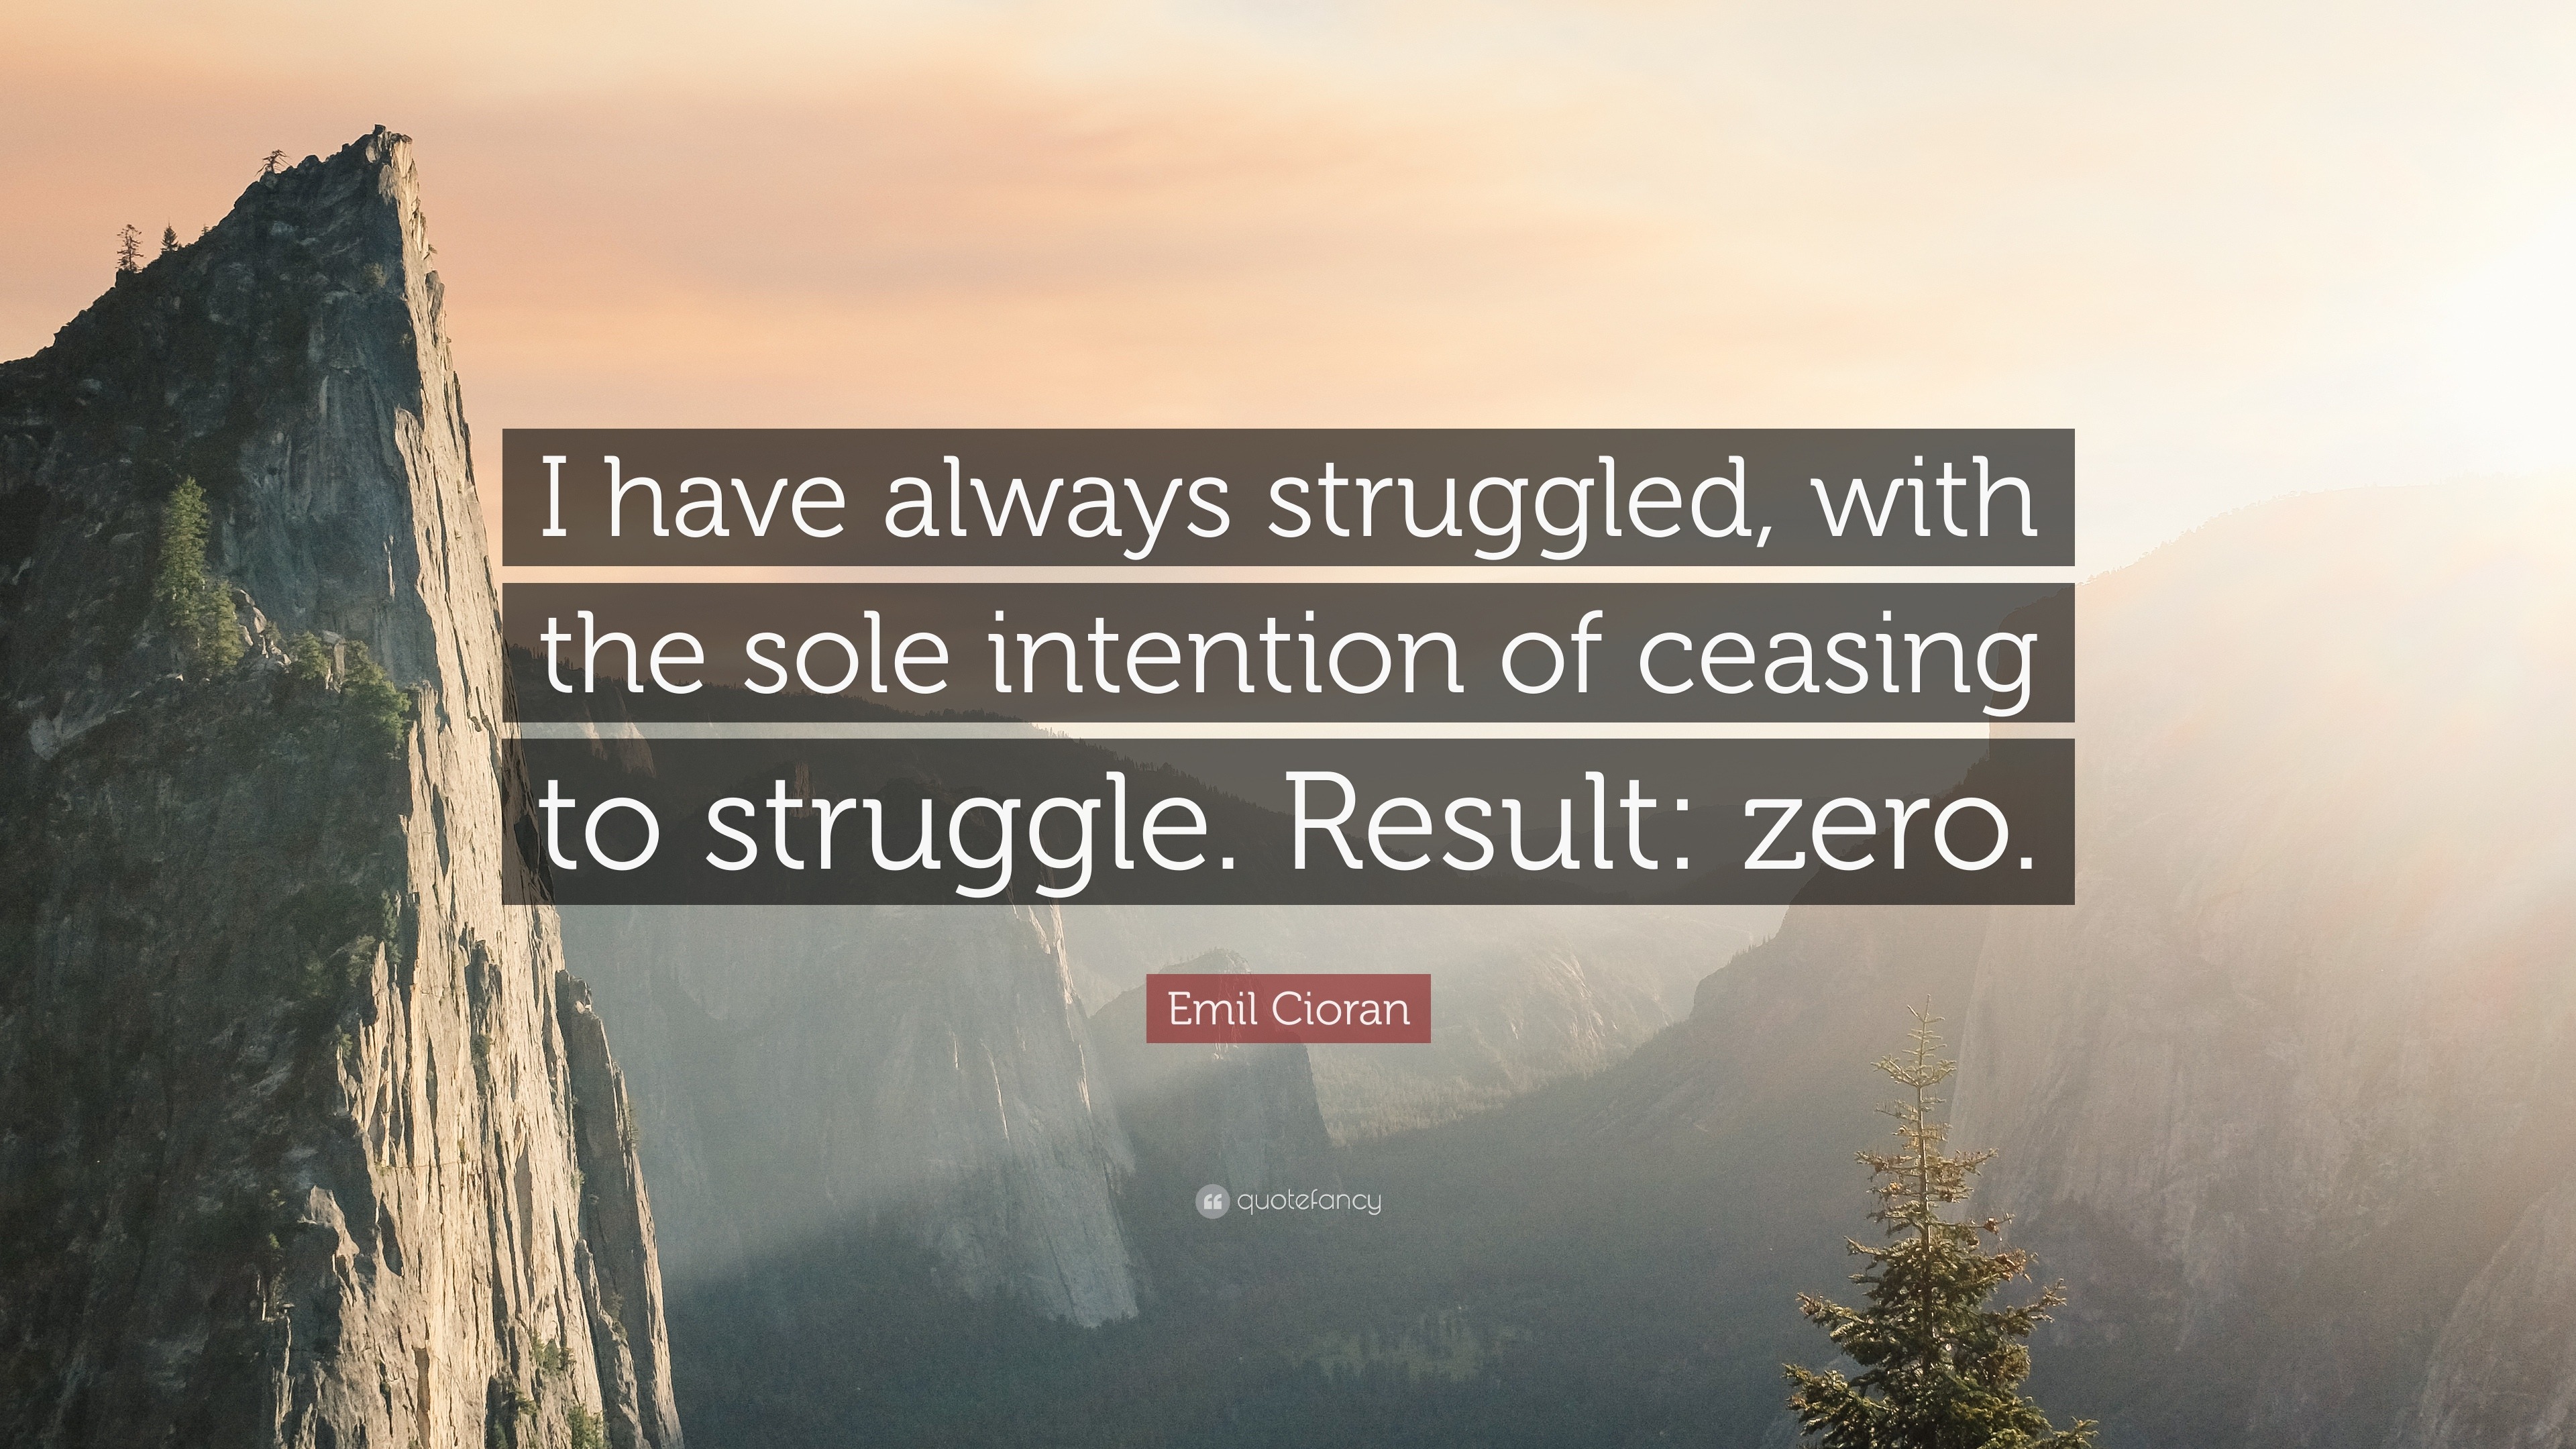 Emil Cioran Quote: "I have always struggled, with the sole intention o...